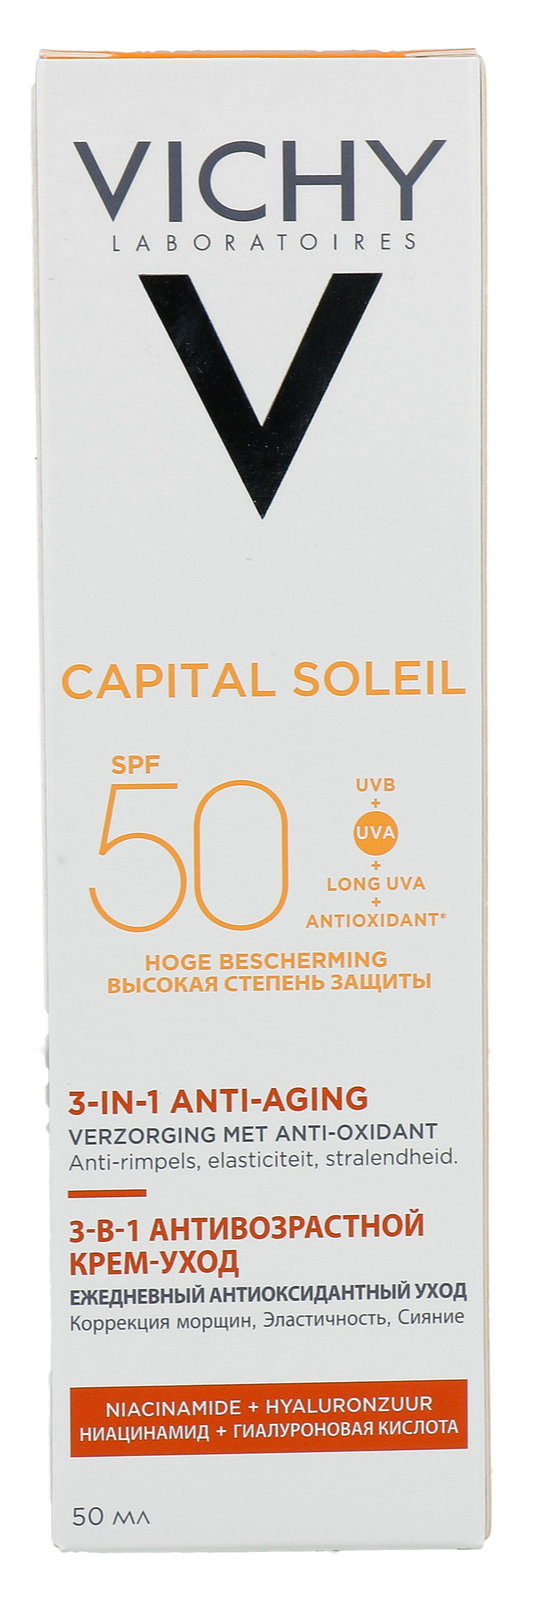 Image of Vichy Capital Soleil 3-in-1 Anti Aging SPF50 